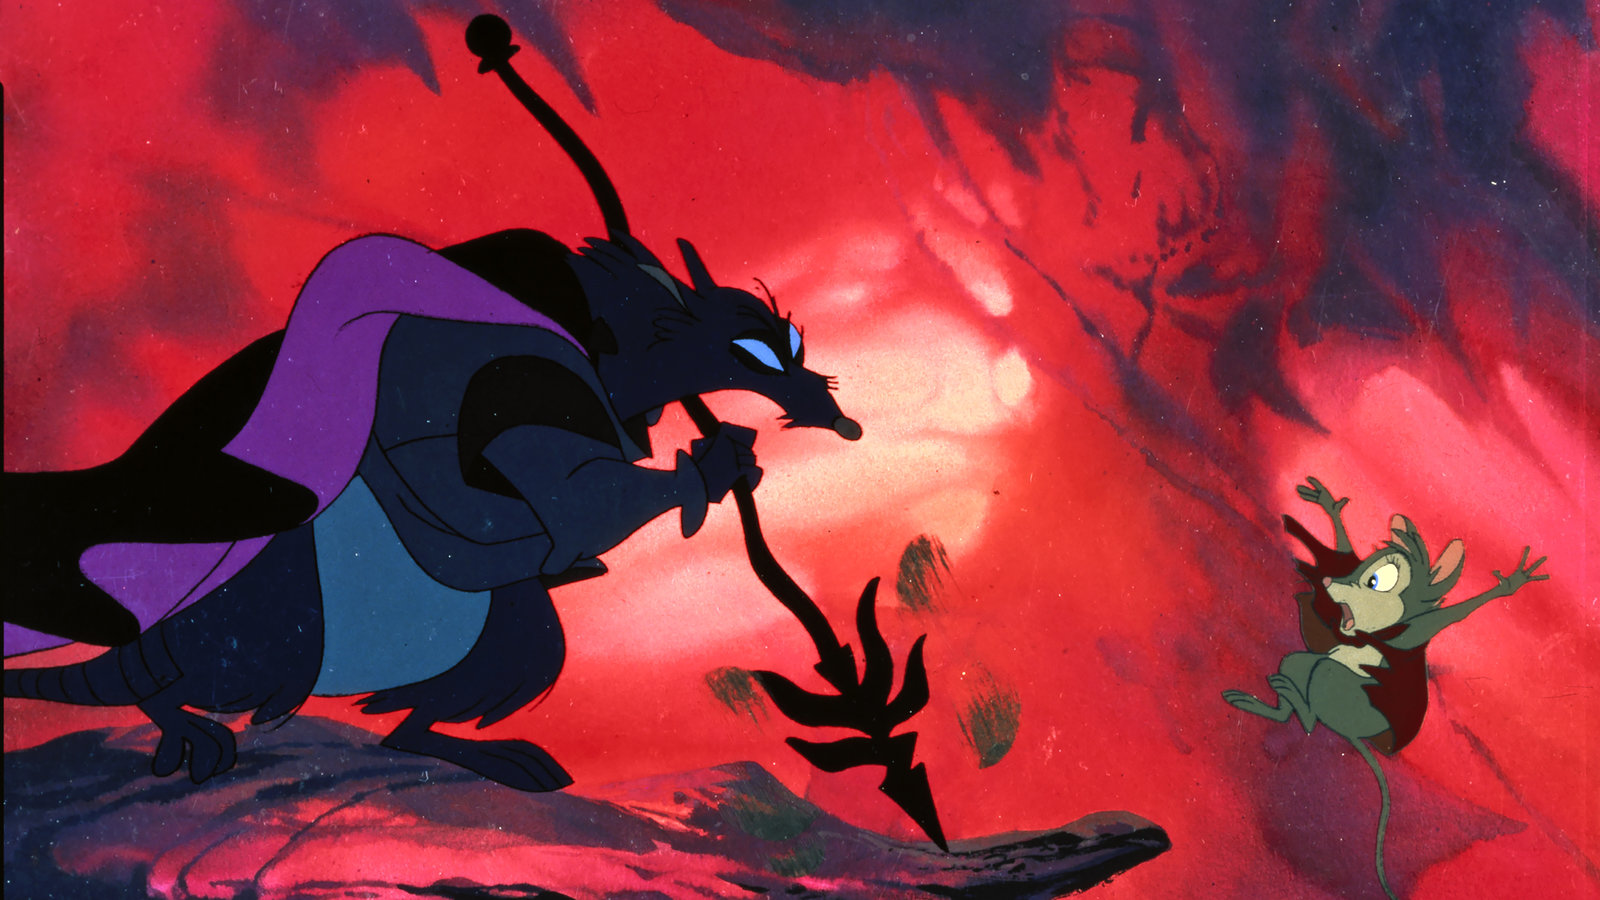 Don Bluth and the Power of Animation